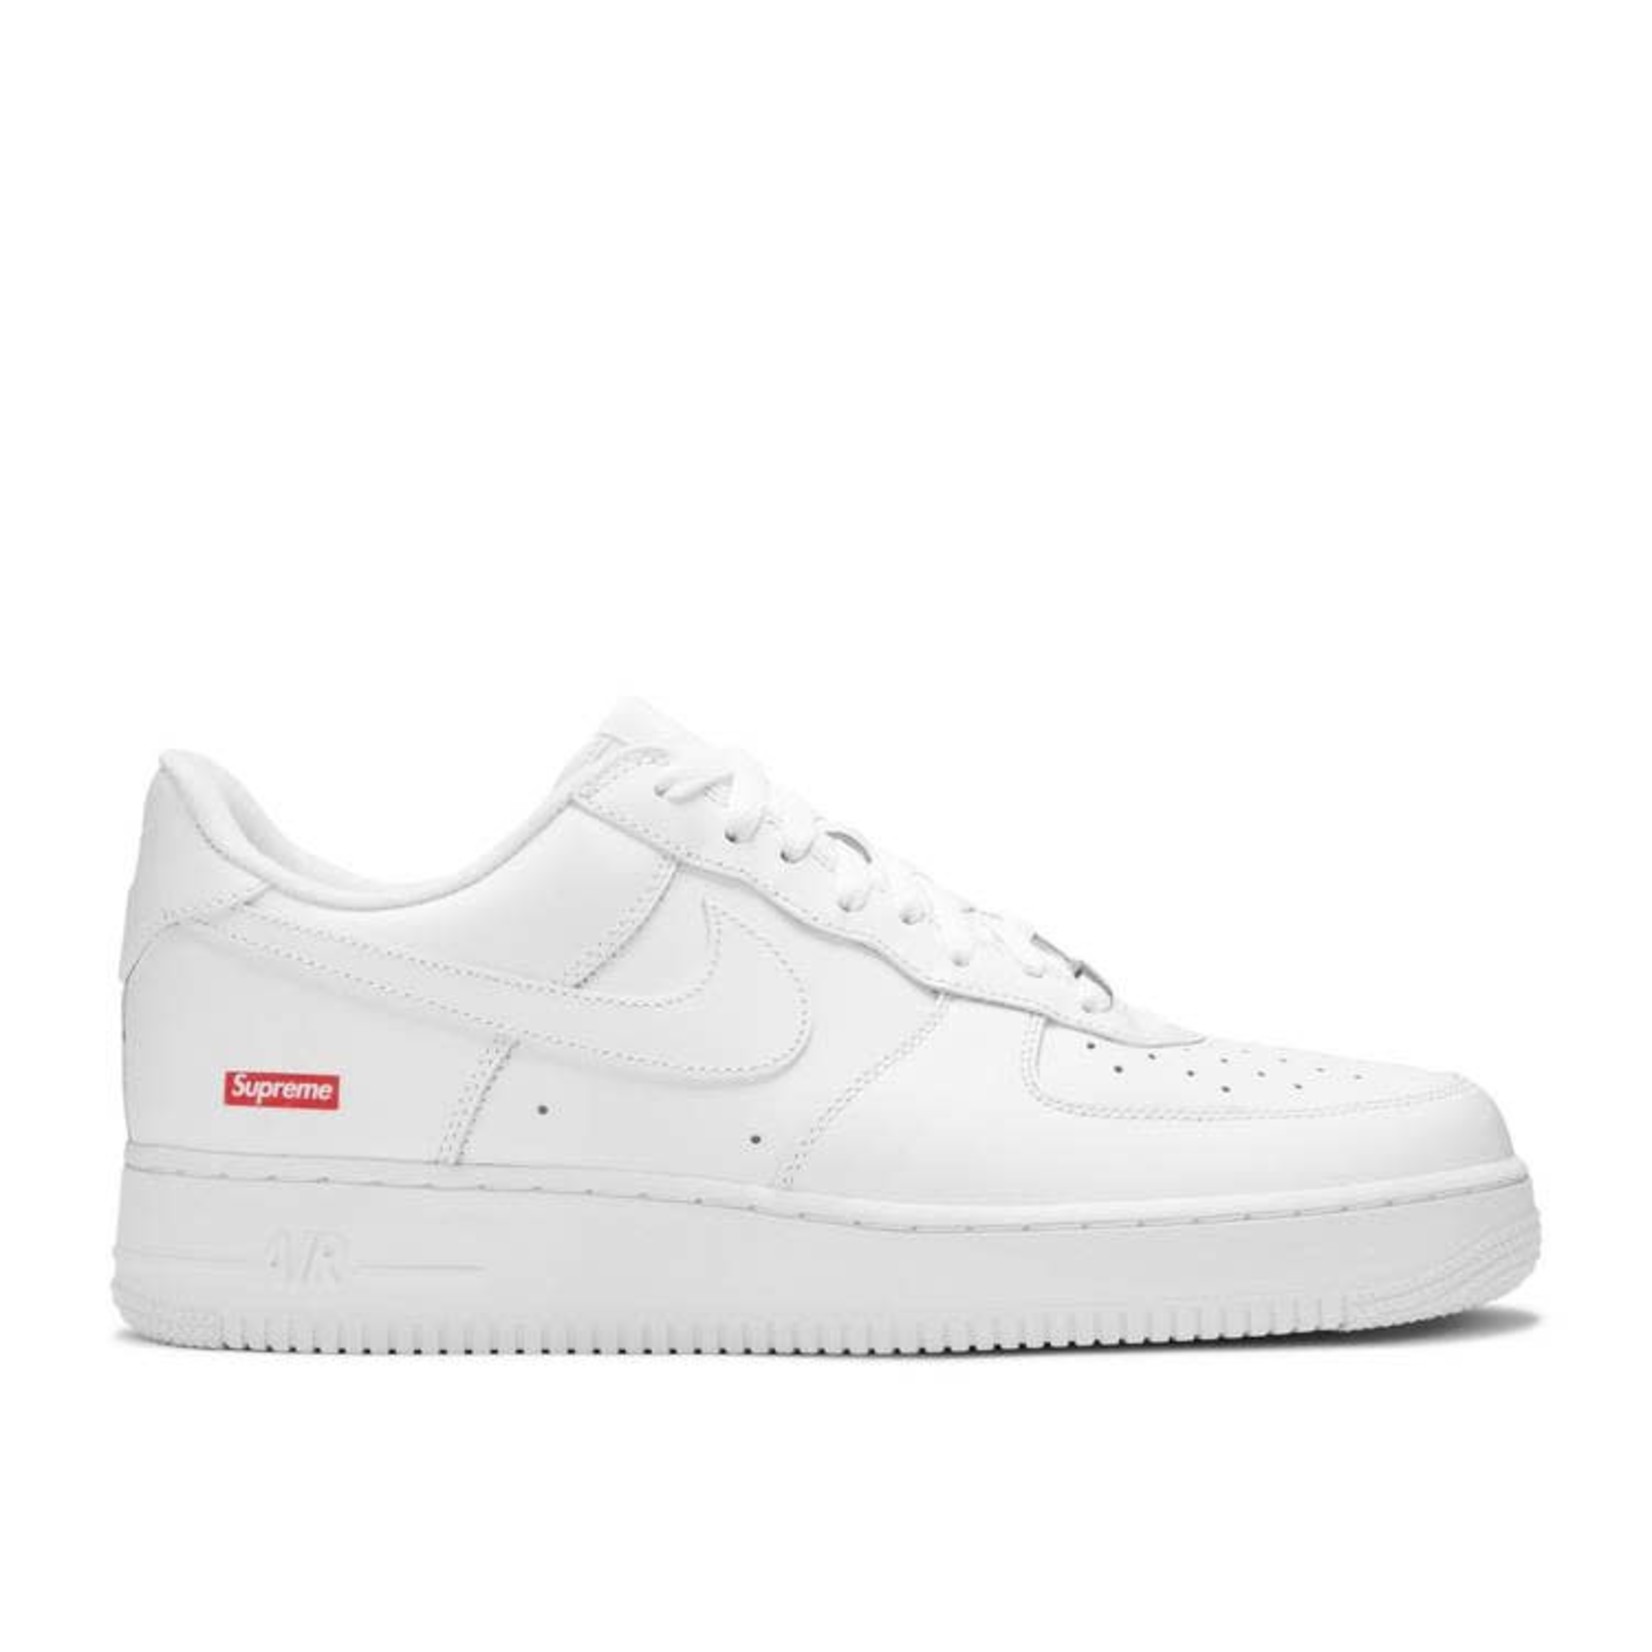 Nike Nike Air Force 1 Low Supreme White Size 6.5, DS BRAND NEW